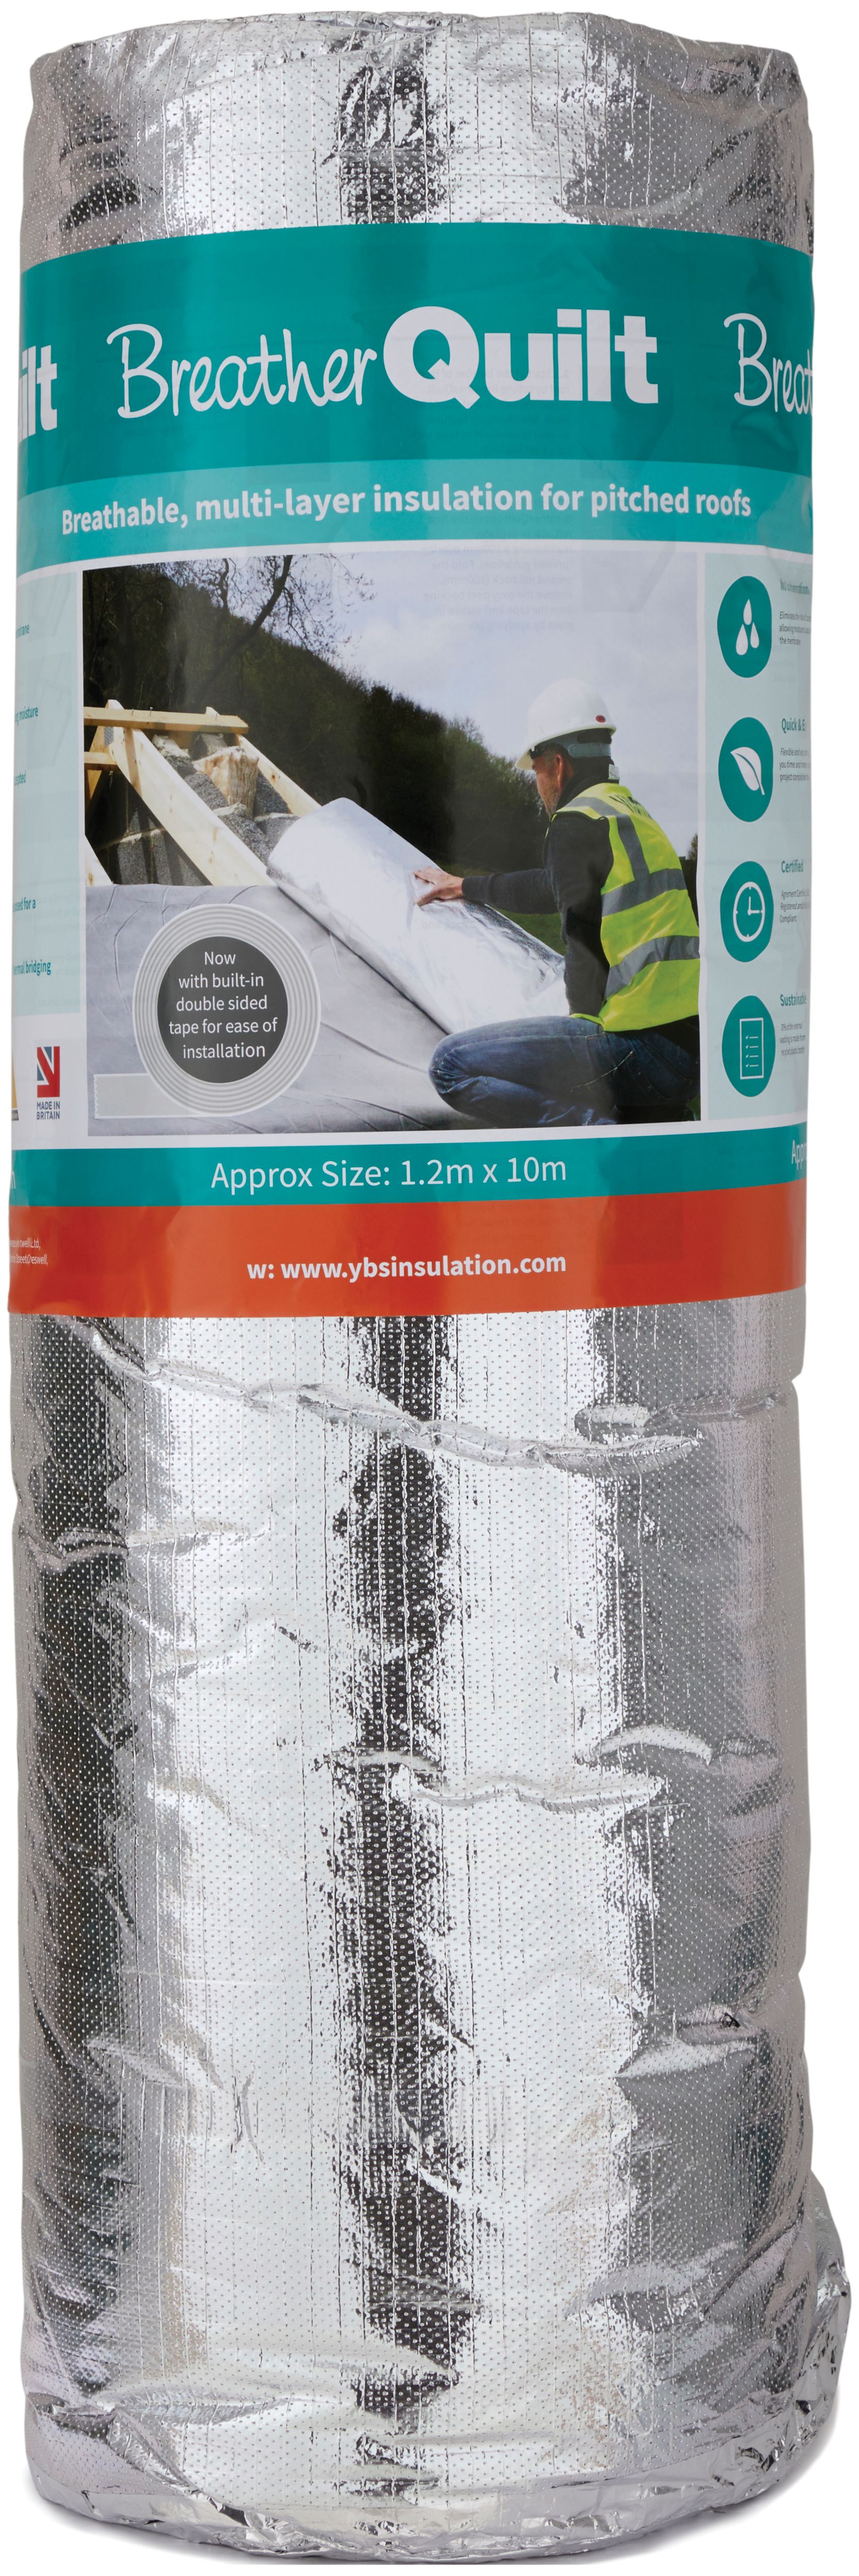 Image of YBS BreatherQuilt 2-in-1 Multifoil 40mm Insulation Roll - 1.2 x 10m